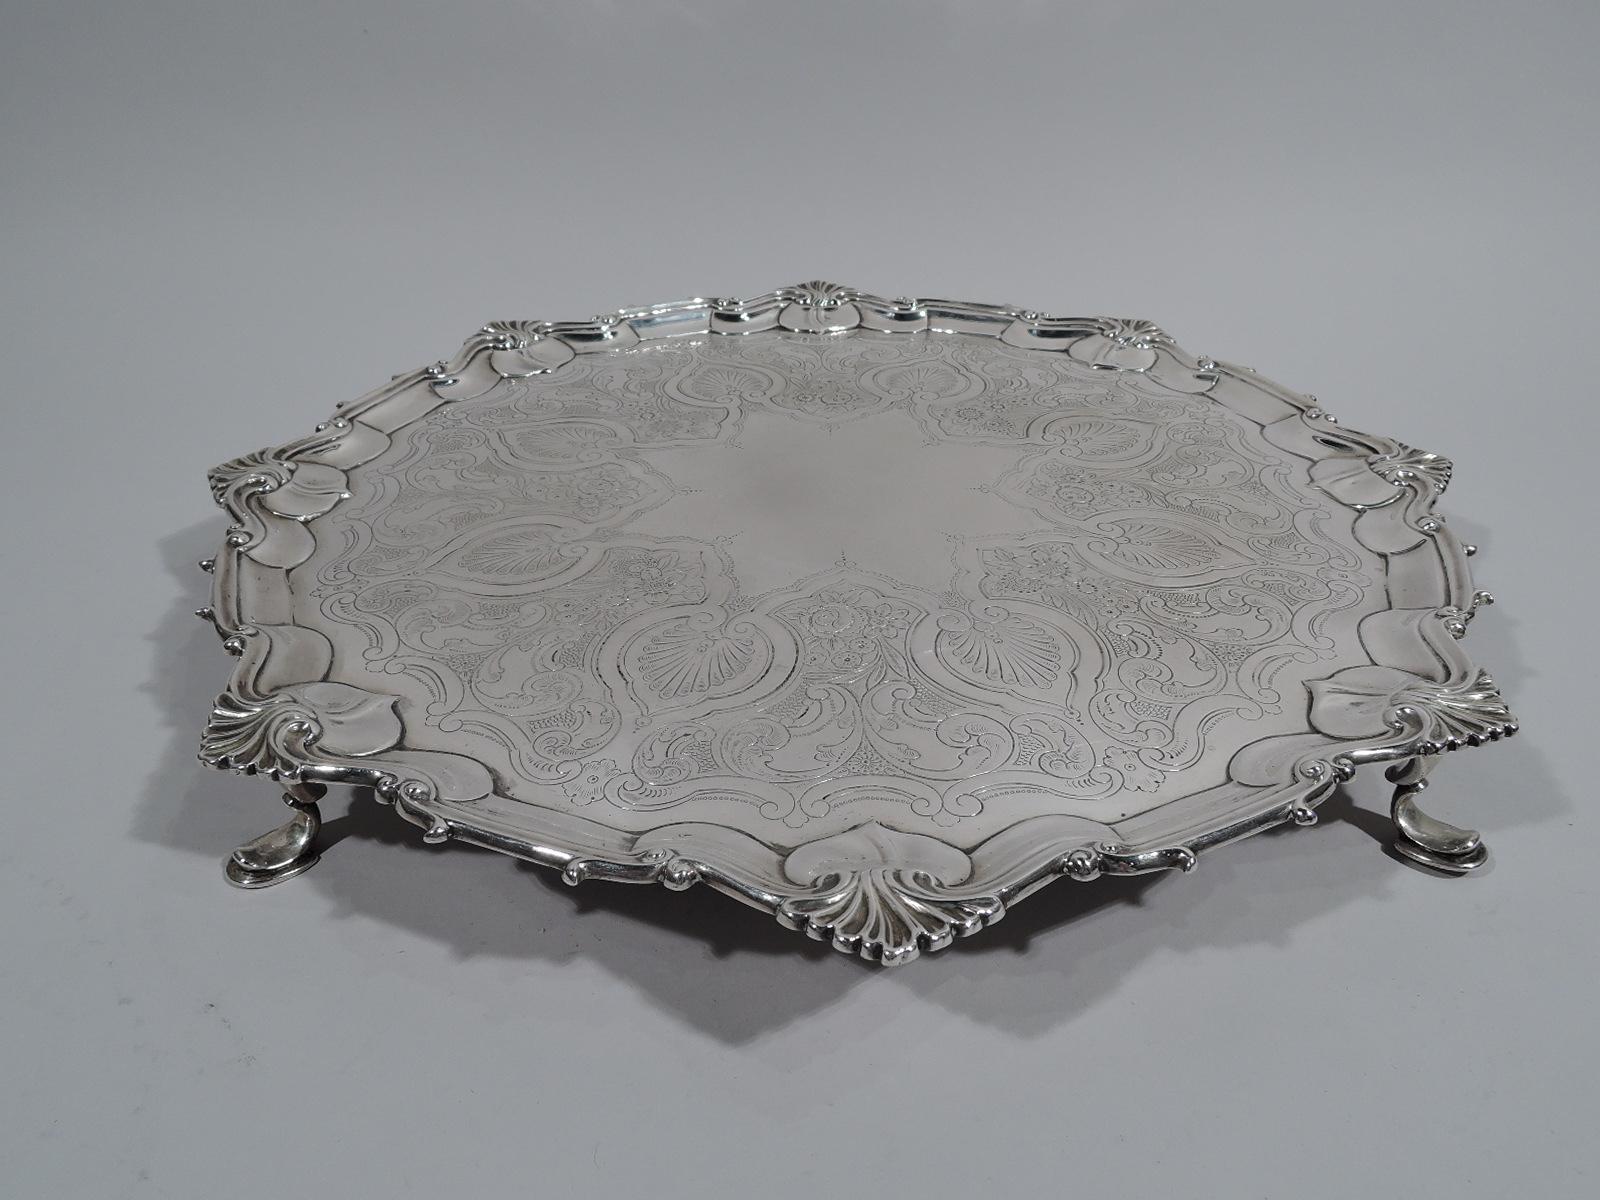 Victorian Georgian sterling silver salver. Made by William Hutton & Sons, Ltd in Sheffield in 1898. Round shaped well, engraved with dense ornament: Palmettes surrounded by scrollwork and flowers. Center has star cartouche (vacant). Molded